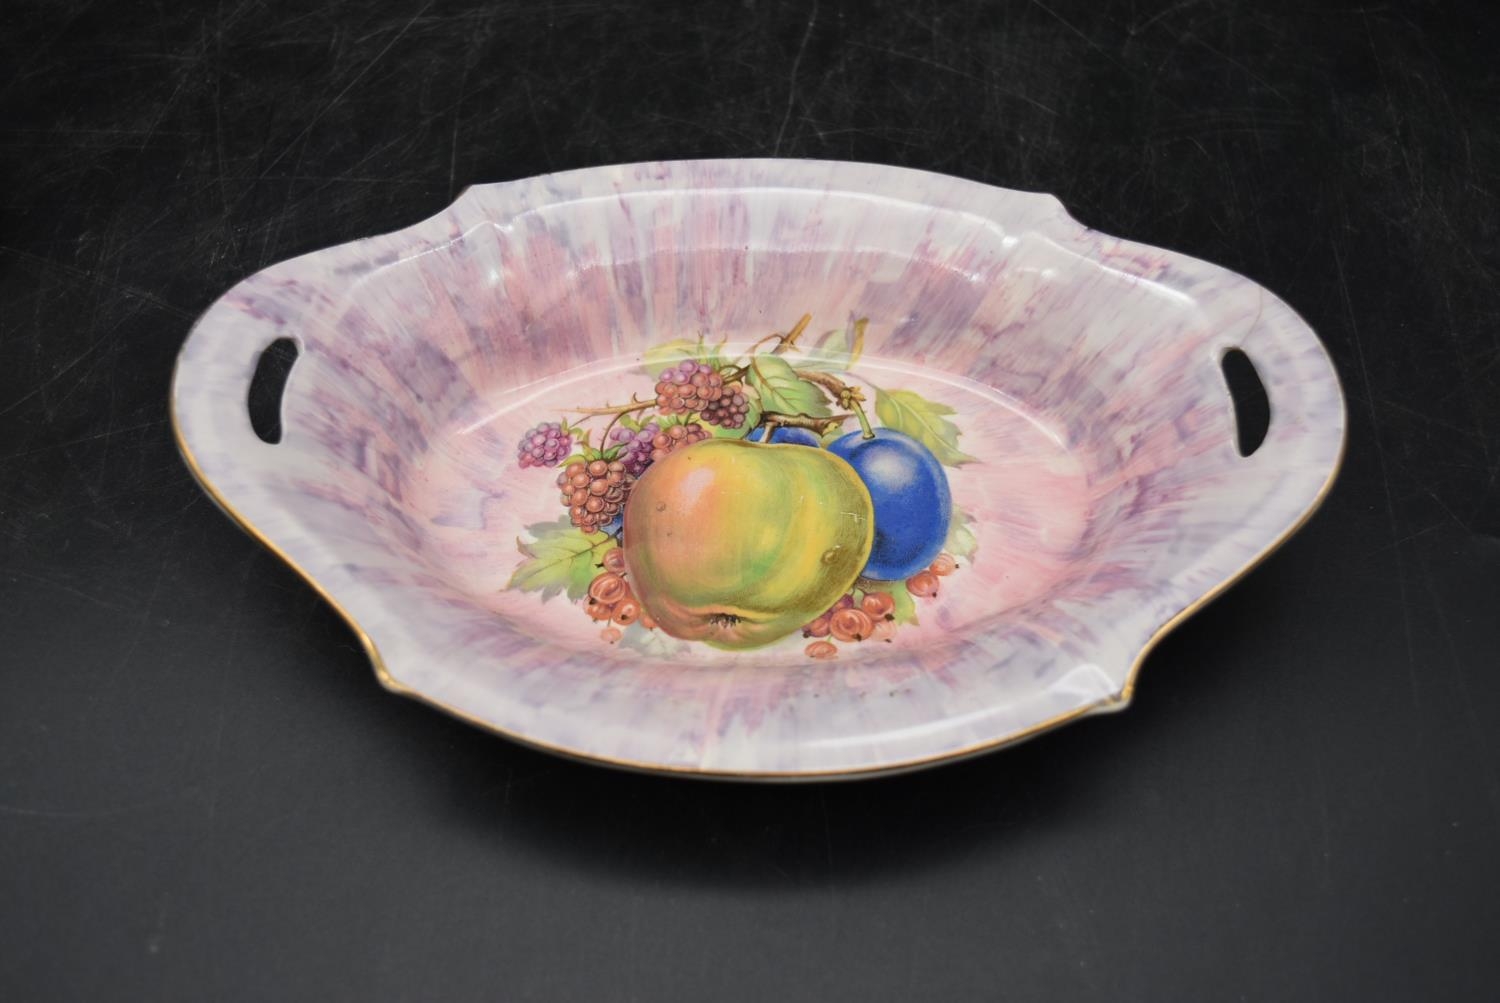 A hand painted Royal Staffordshire dish by Clarice Cliff, along with a porcelain saucer, depicting a - Image 2 of 8